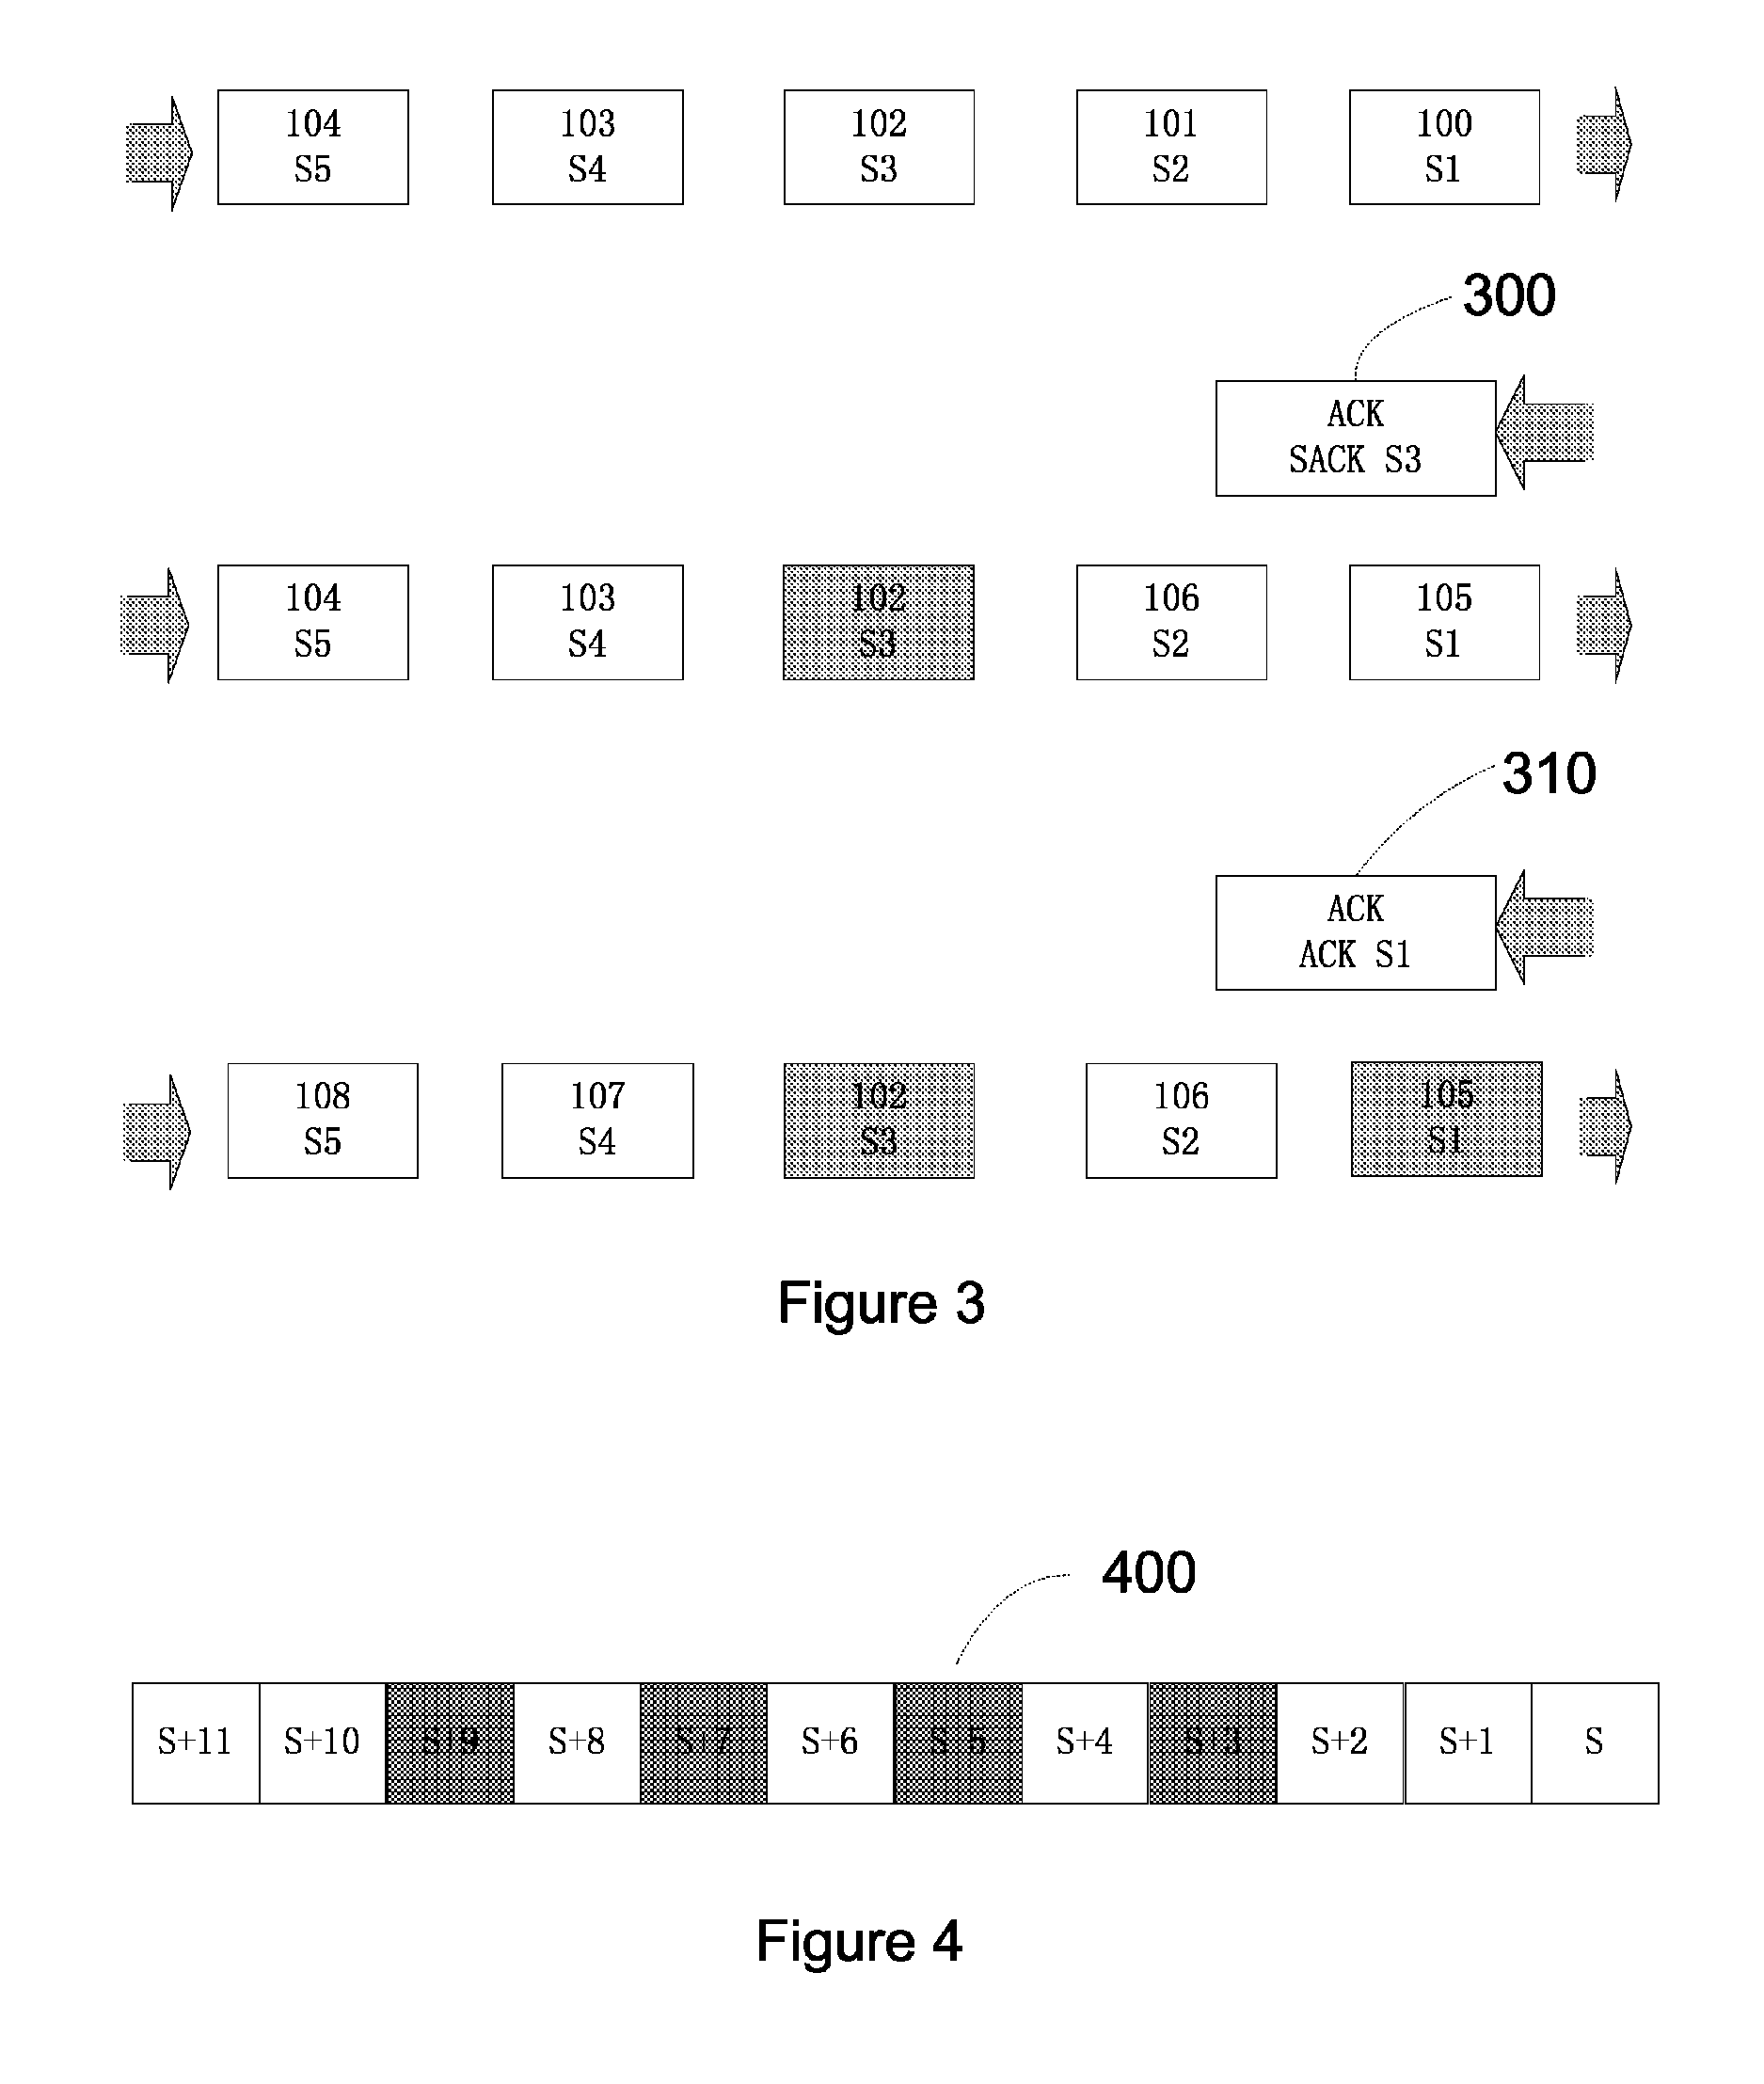 Method for detecting TCP packet losses and expediting packet retransmission